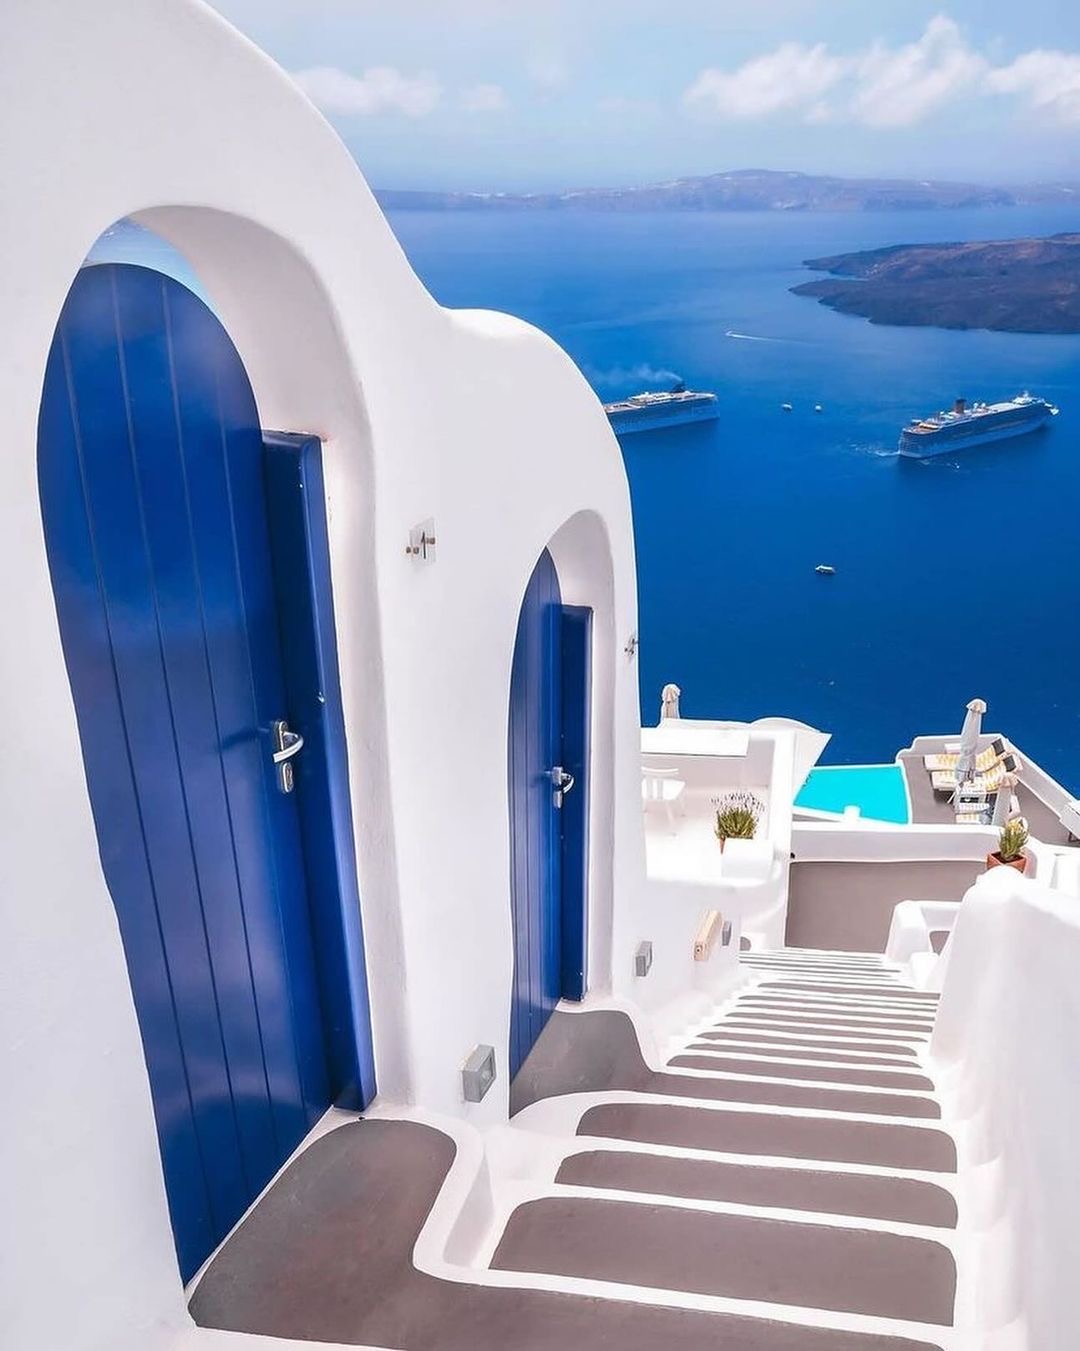 7 Things to See and do in Santorini Greece ...